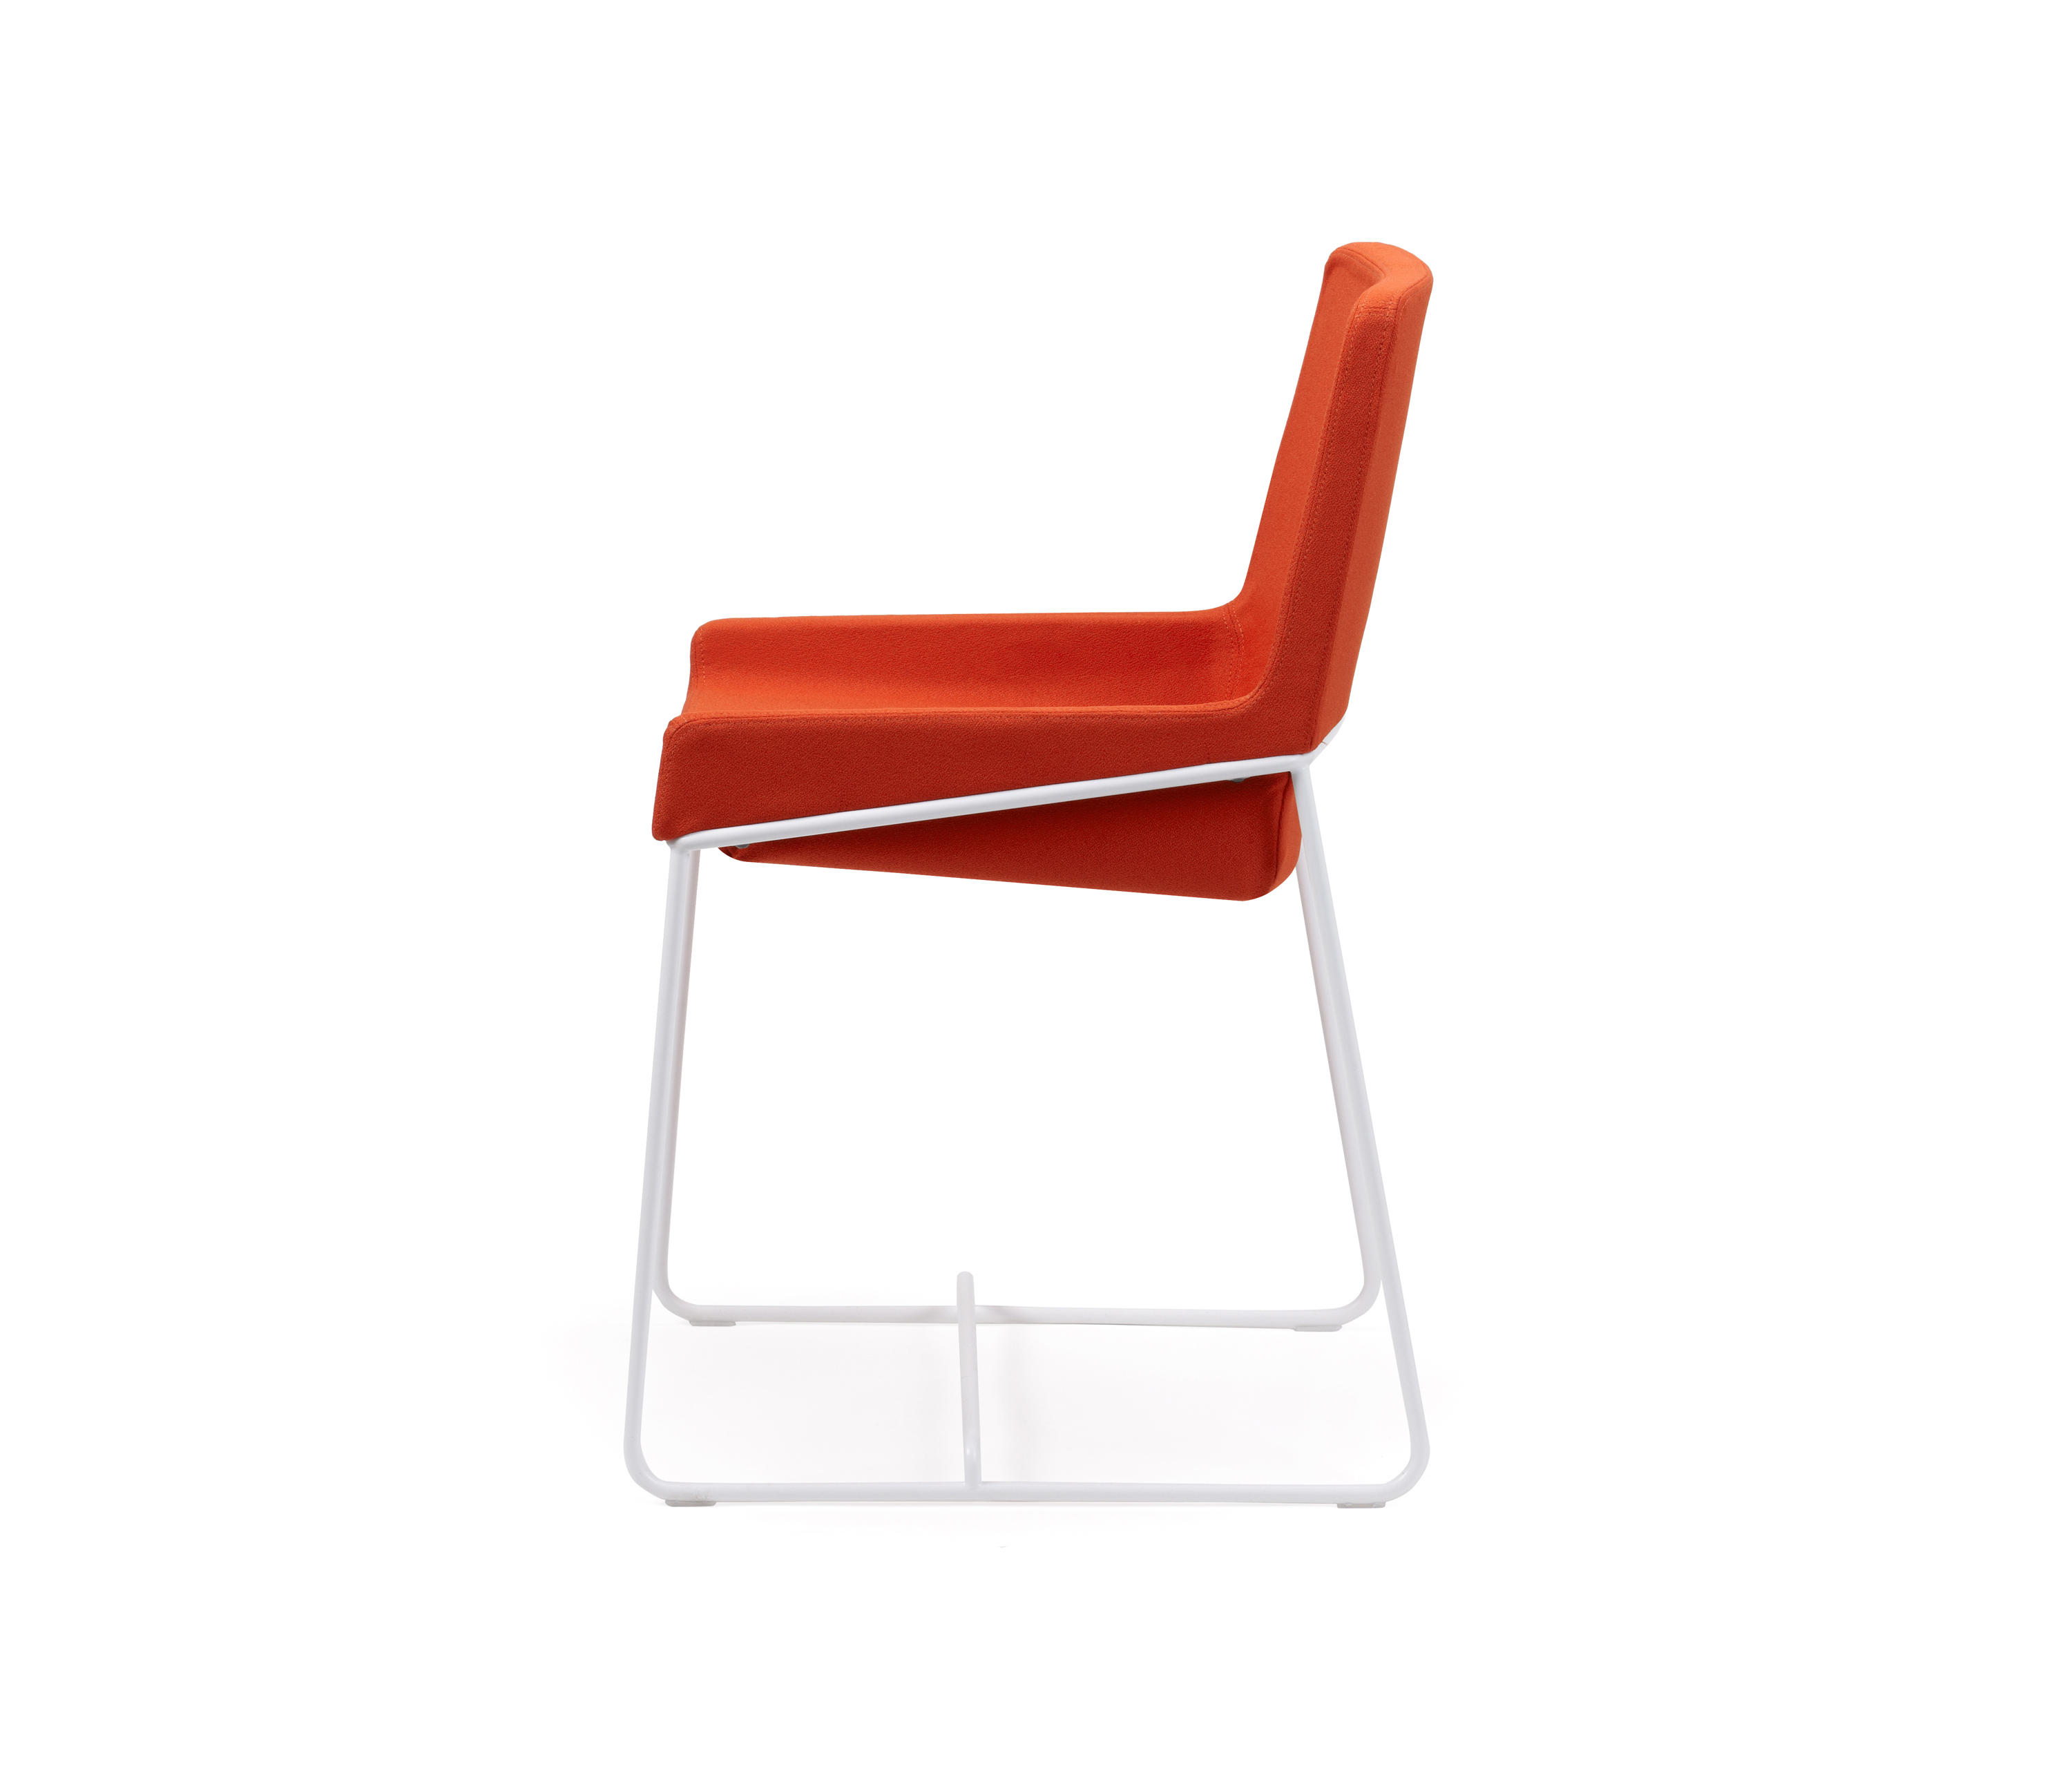 Tonic stackable chair & designer furniture | Architonic